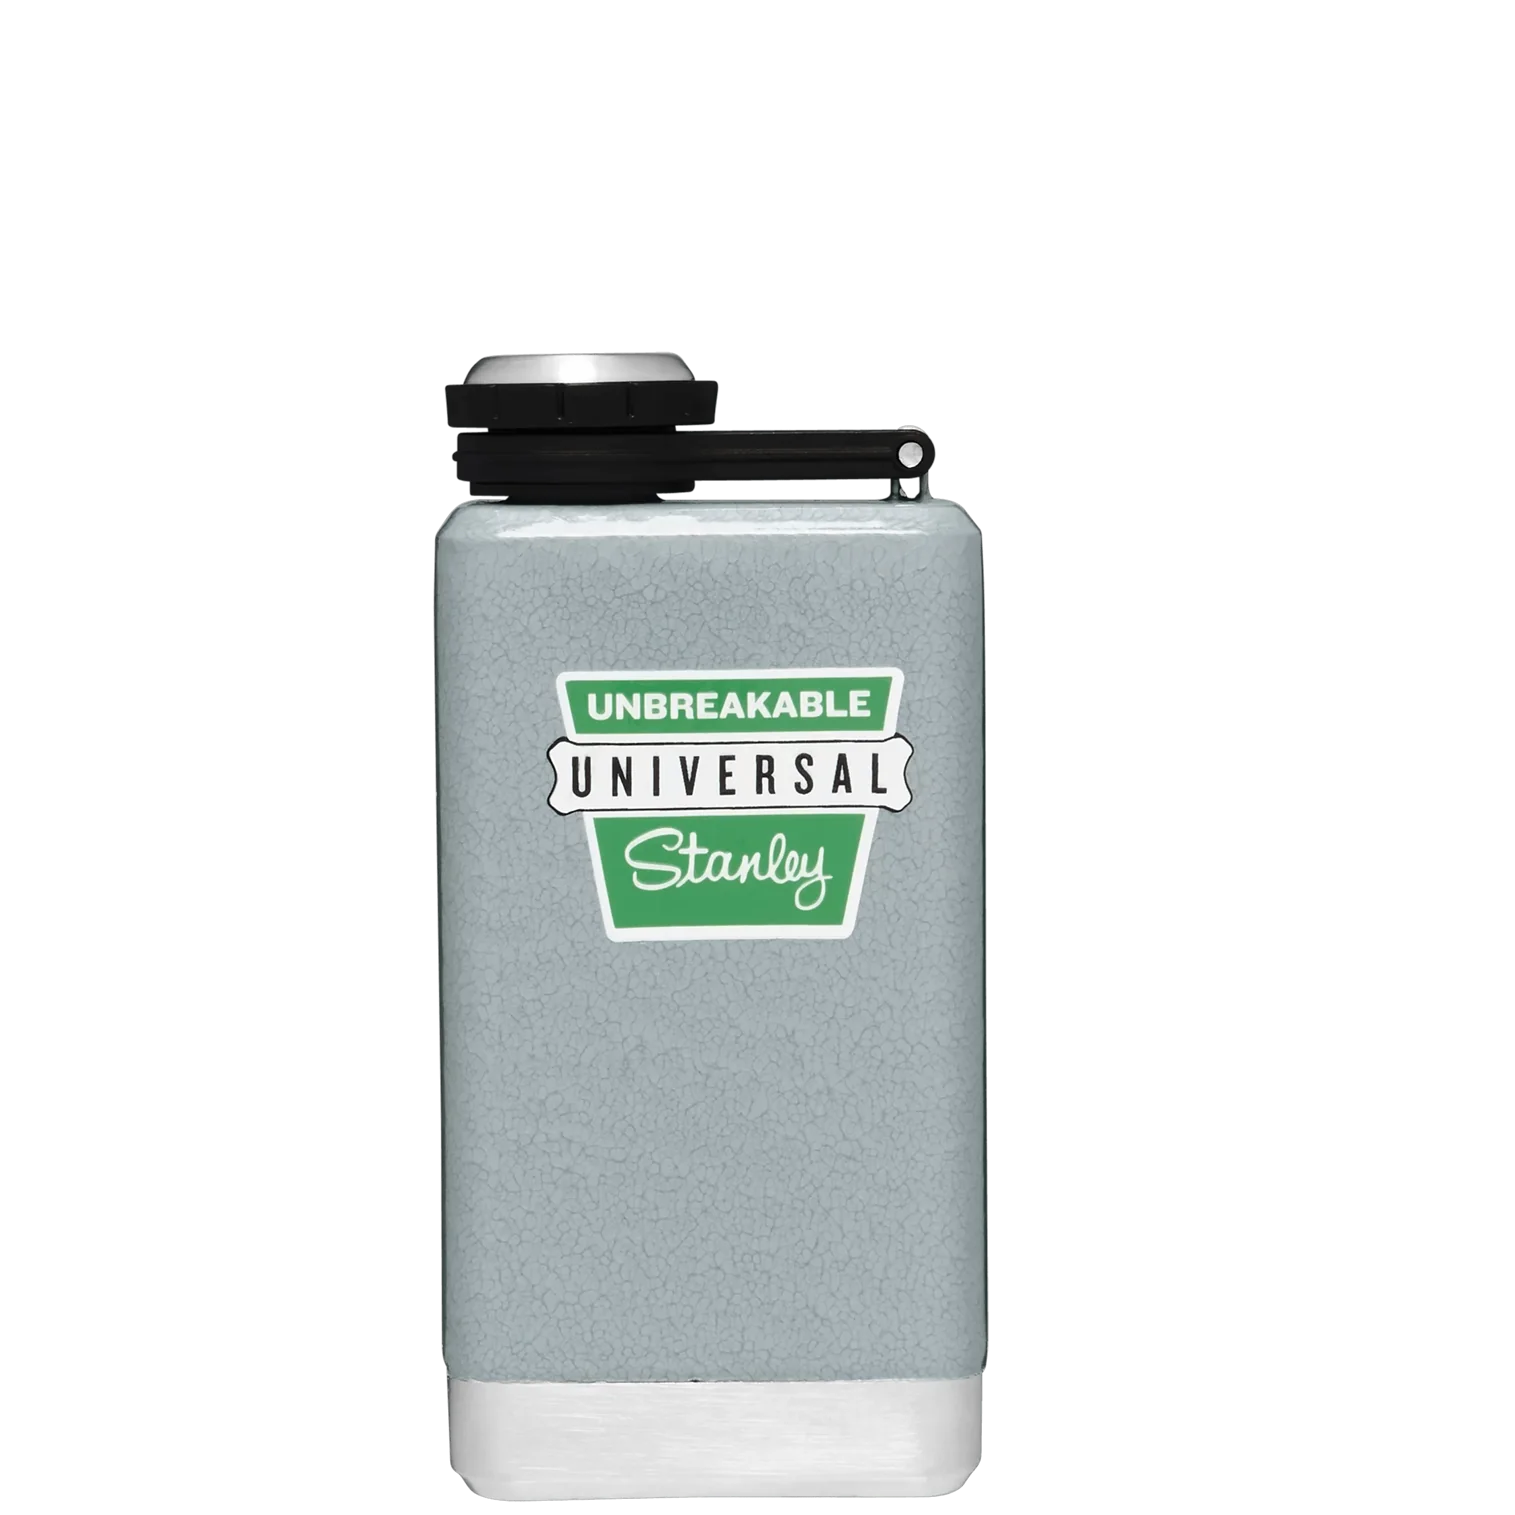 Stanley - The Milestones Party Flask | 5 OZ | 1960 H. Silver